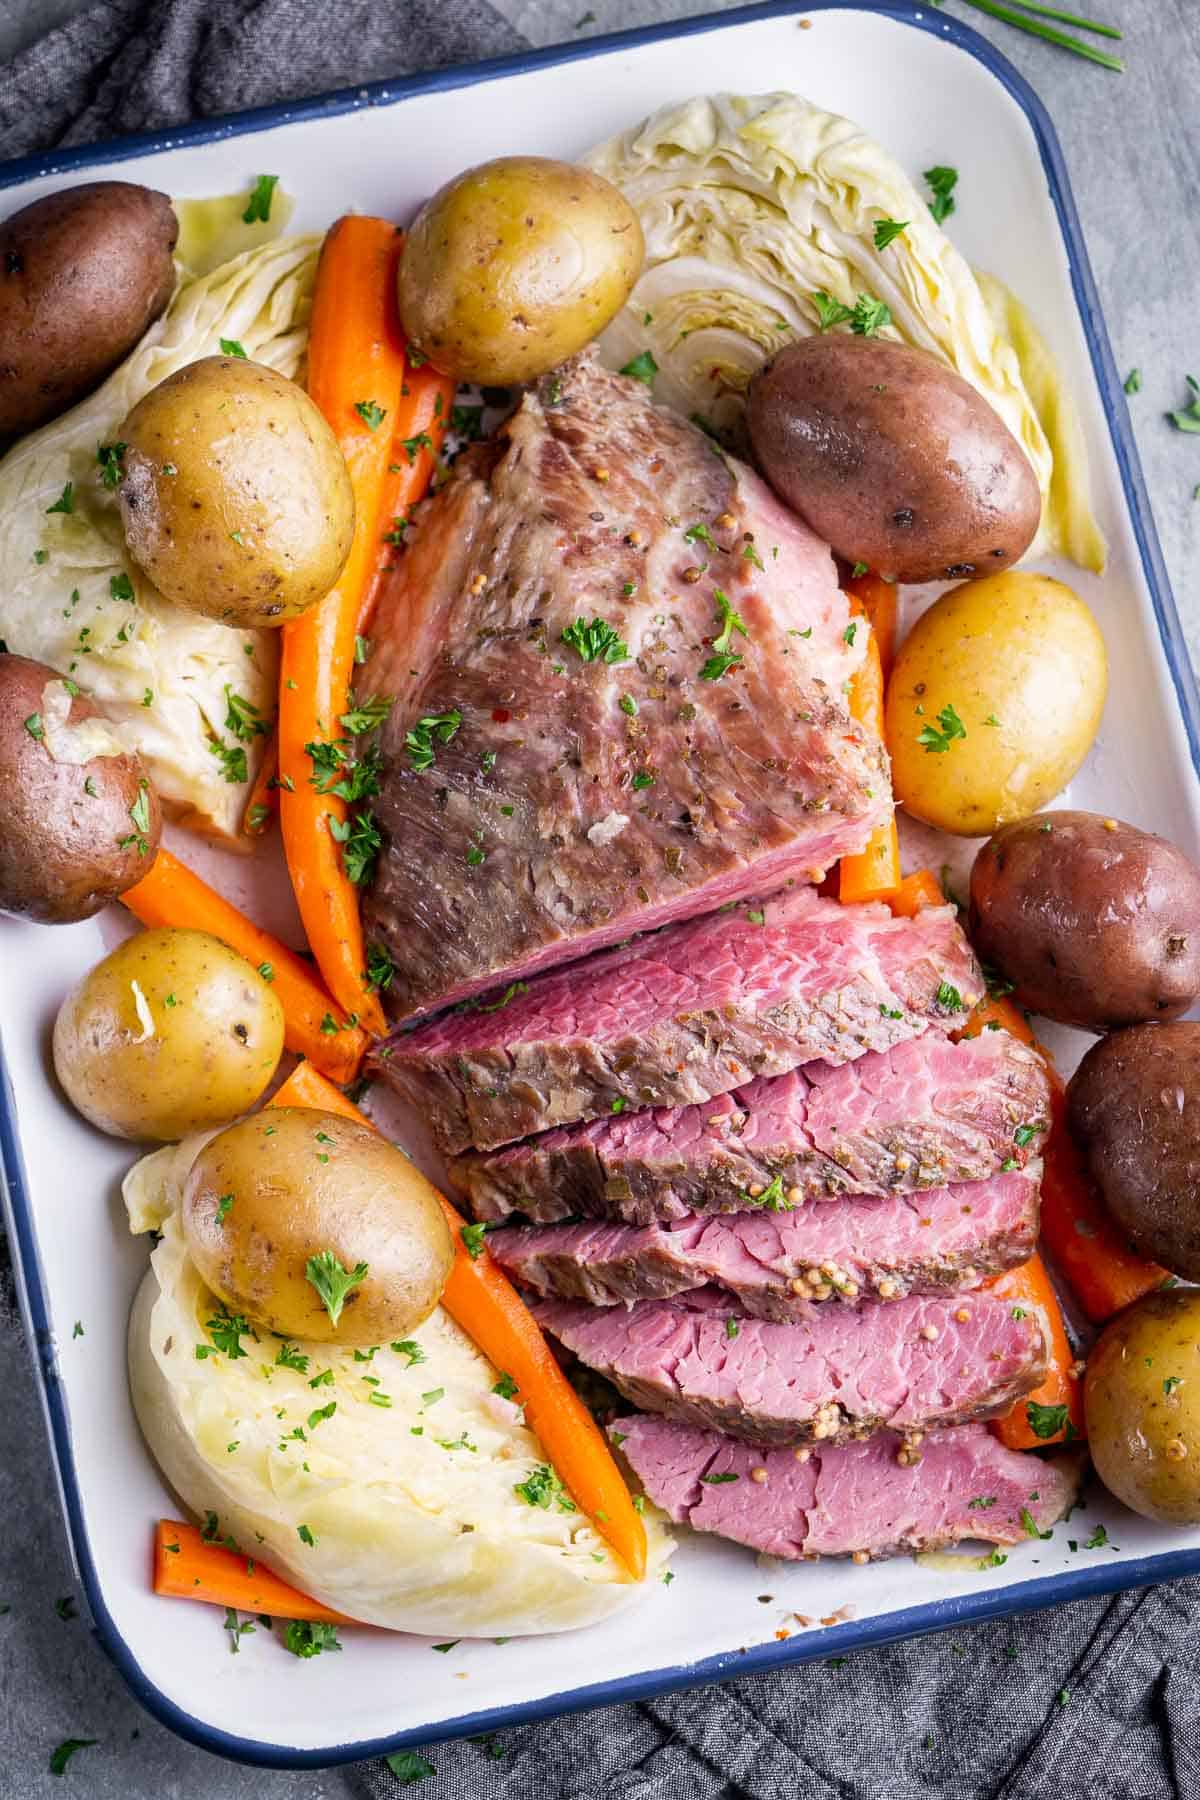 Sliced corned beef in roasting pan with cabbage wedges, carrots, and whole potatoes